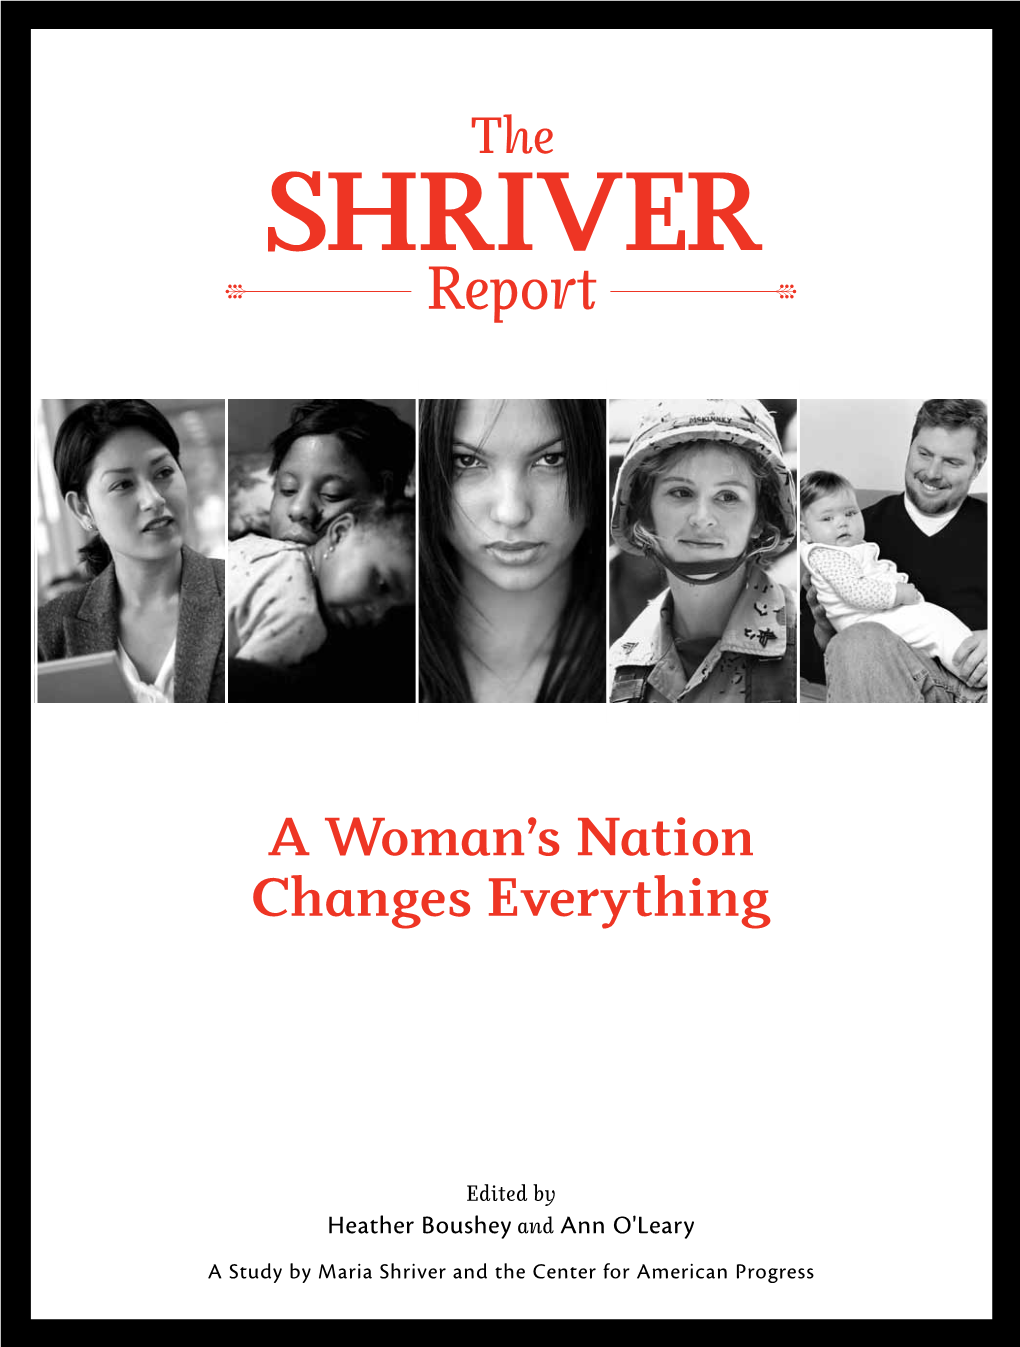 The Shriver Report: a Woman's Nation Changes Everything, October 2009